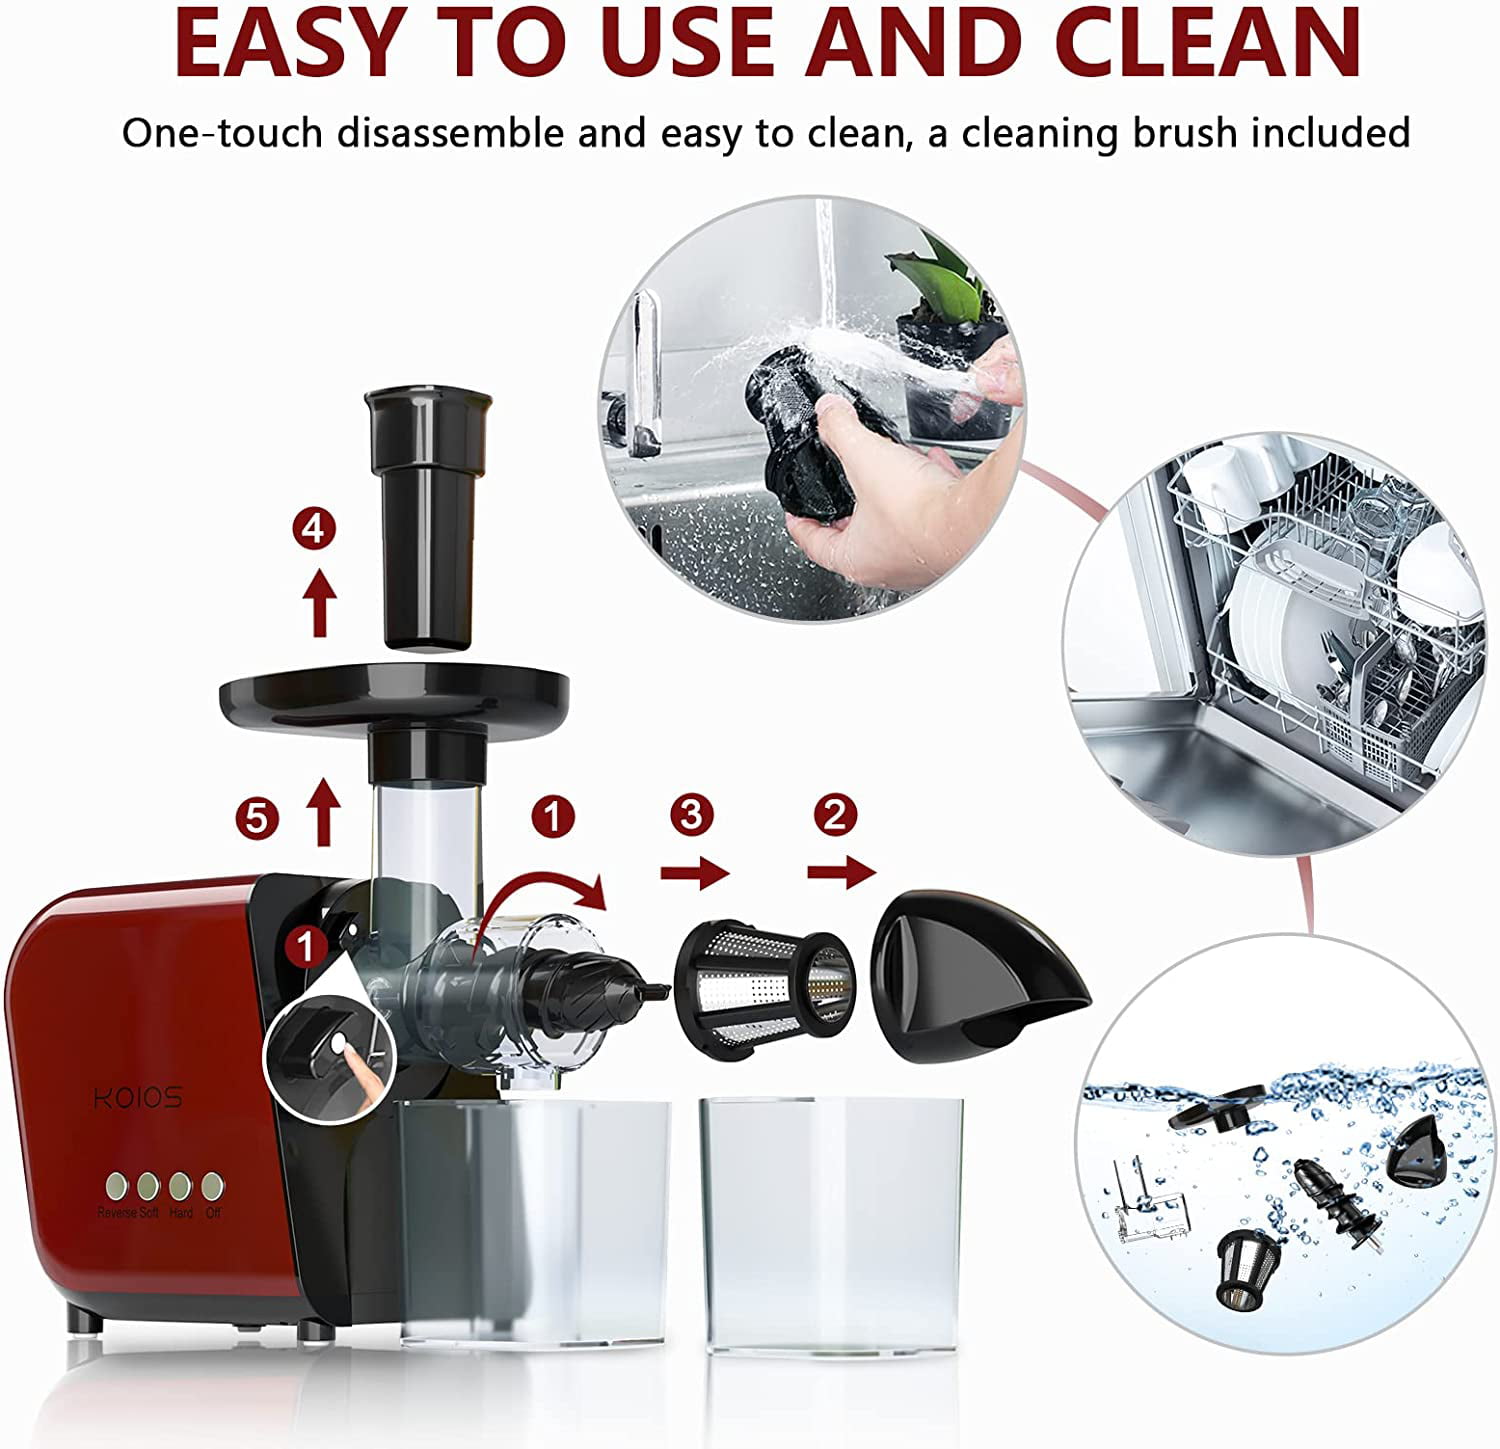 KOIOS Juicer Machine Easy to Clean 600W Small Juice Extractor for Fruit Veg